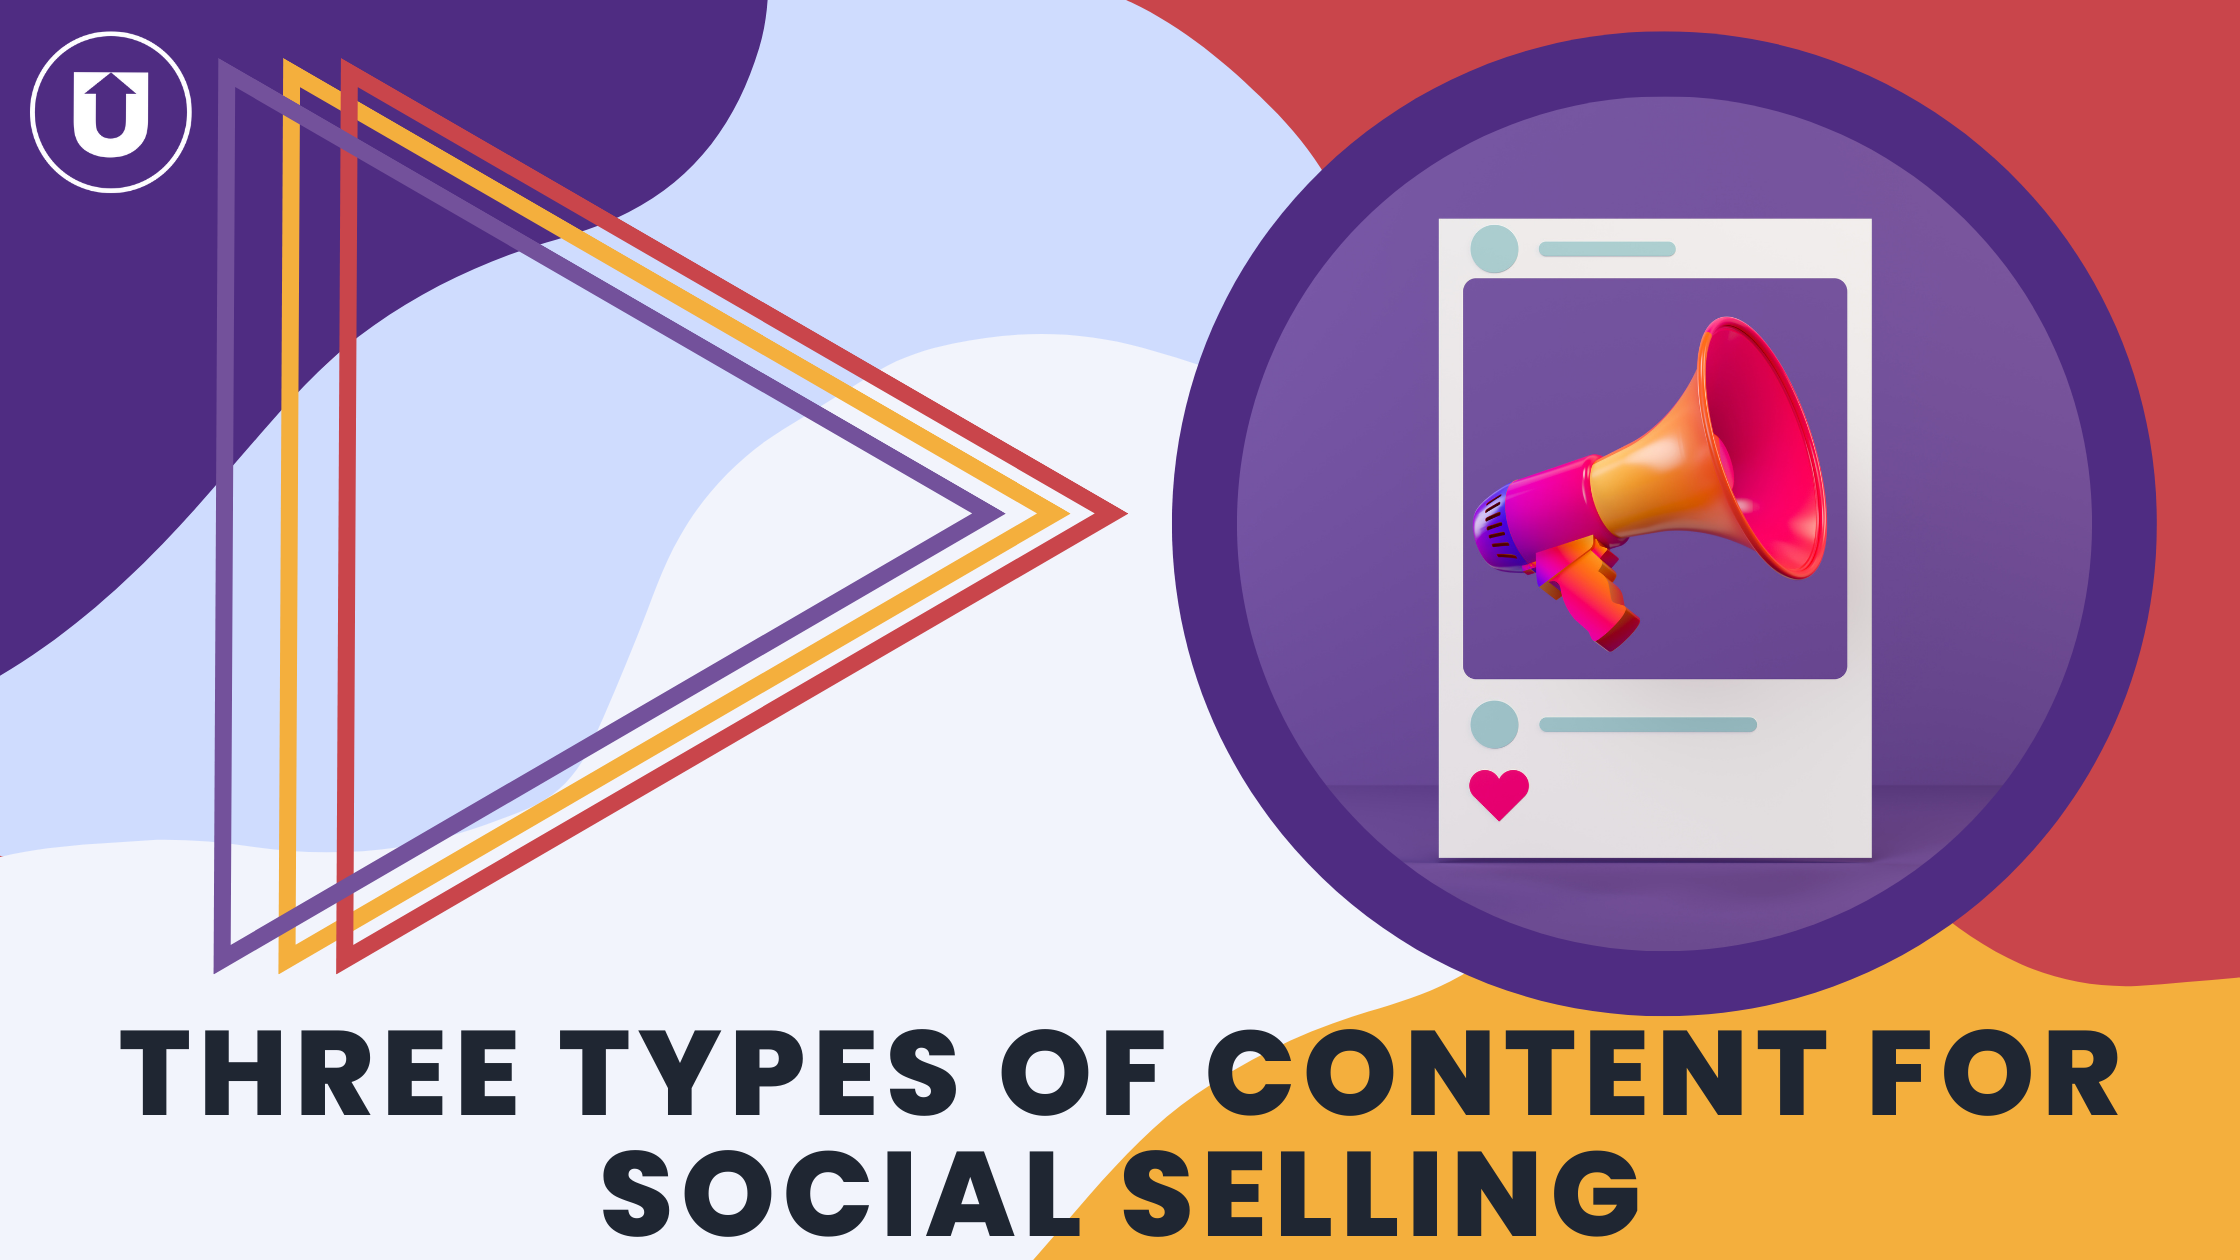 635bd9eeb7bd988ffe5c858a_three types of content for social selling